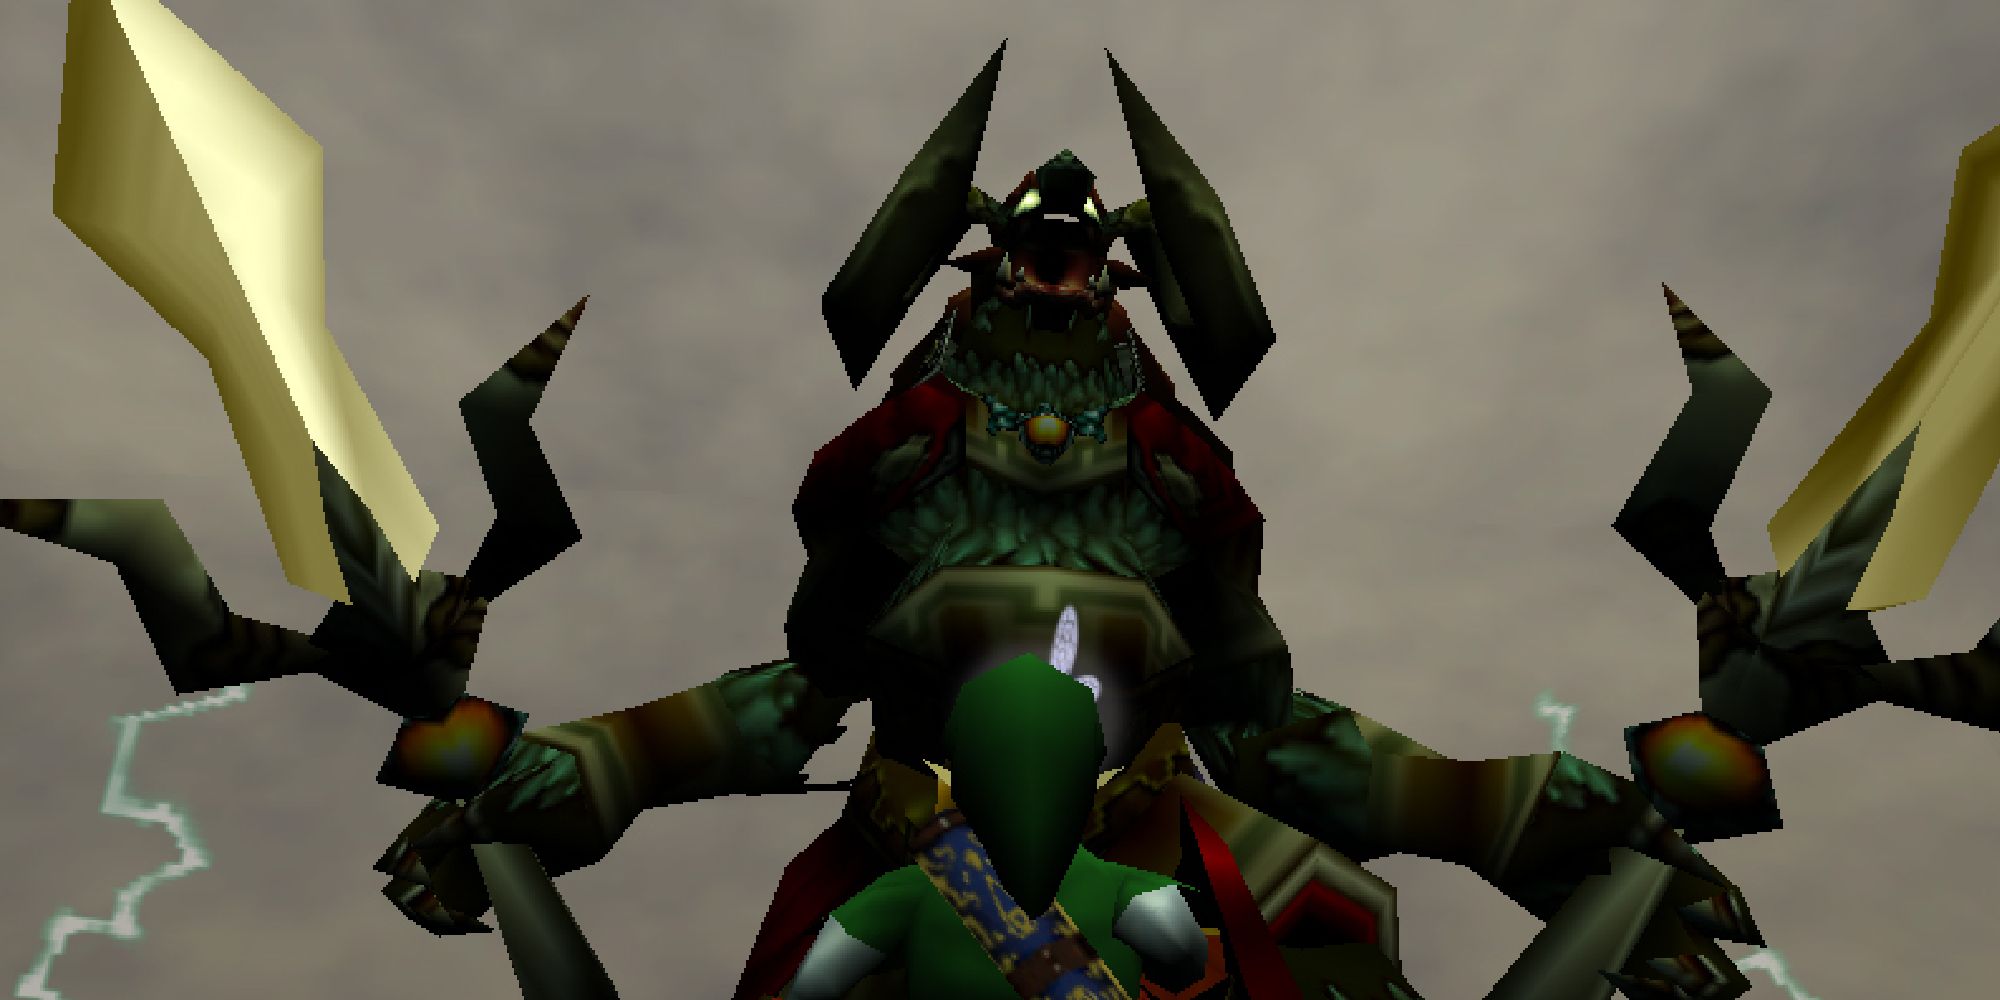 Demon King Ganon facing off against Link at the end of Ocarina of Time